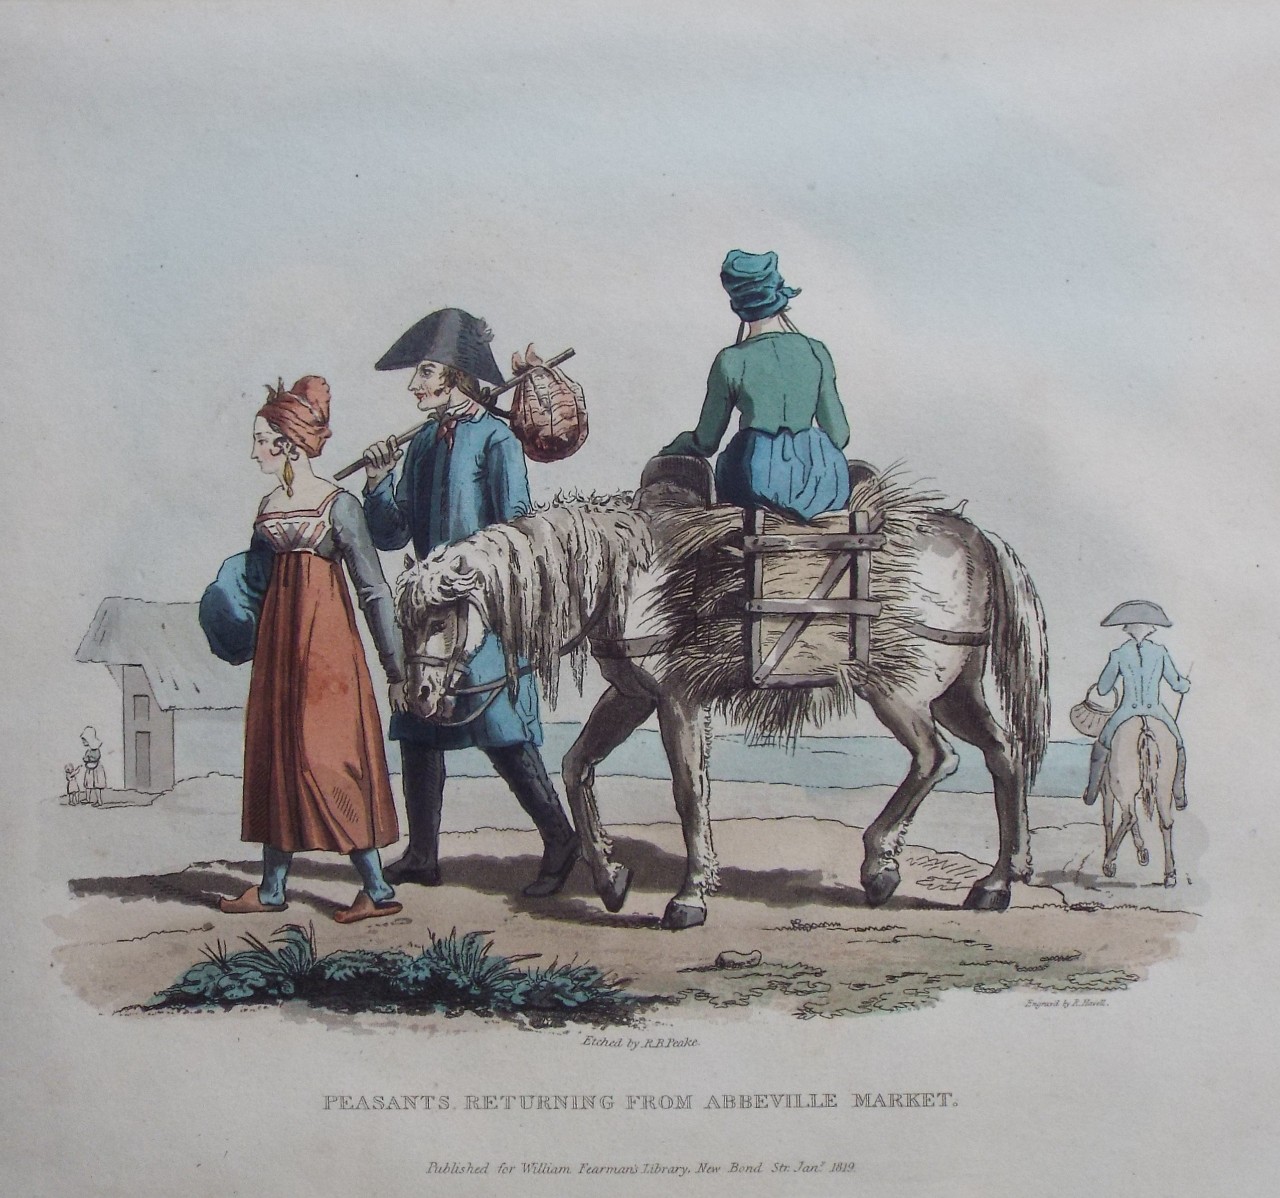 Aquatint - Peasants Returning from Abbeville Market. - Havell